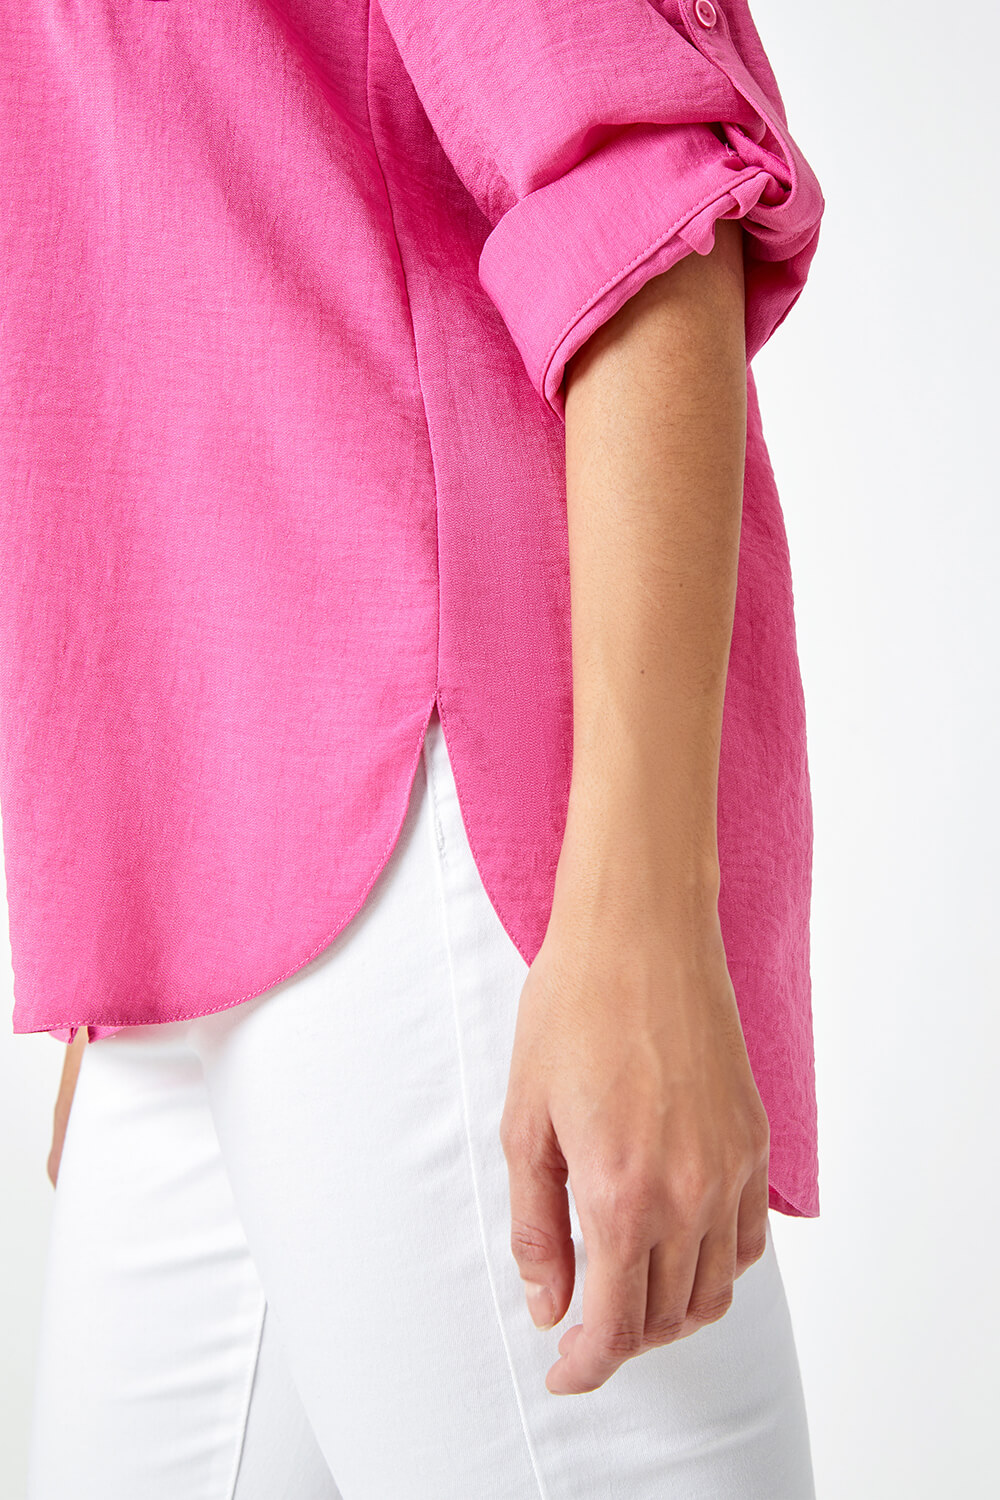 PINK Relaxed Longline Shirt, Image 5 of 5